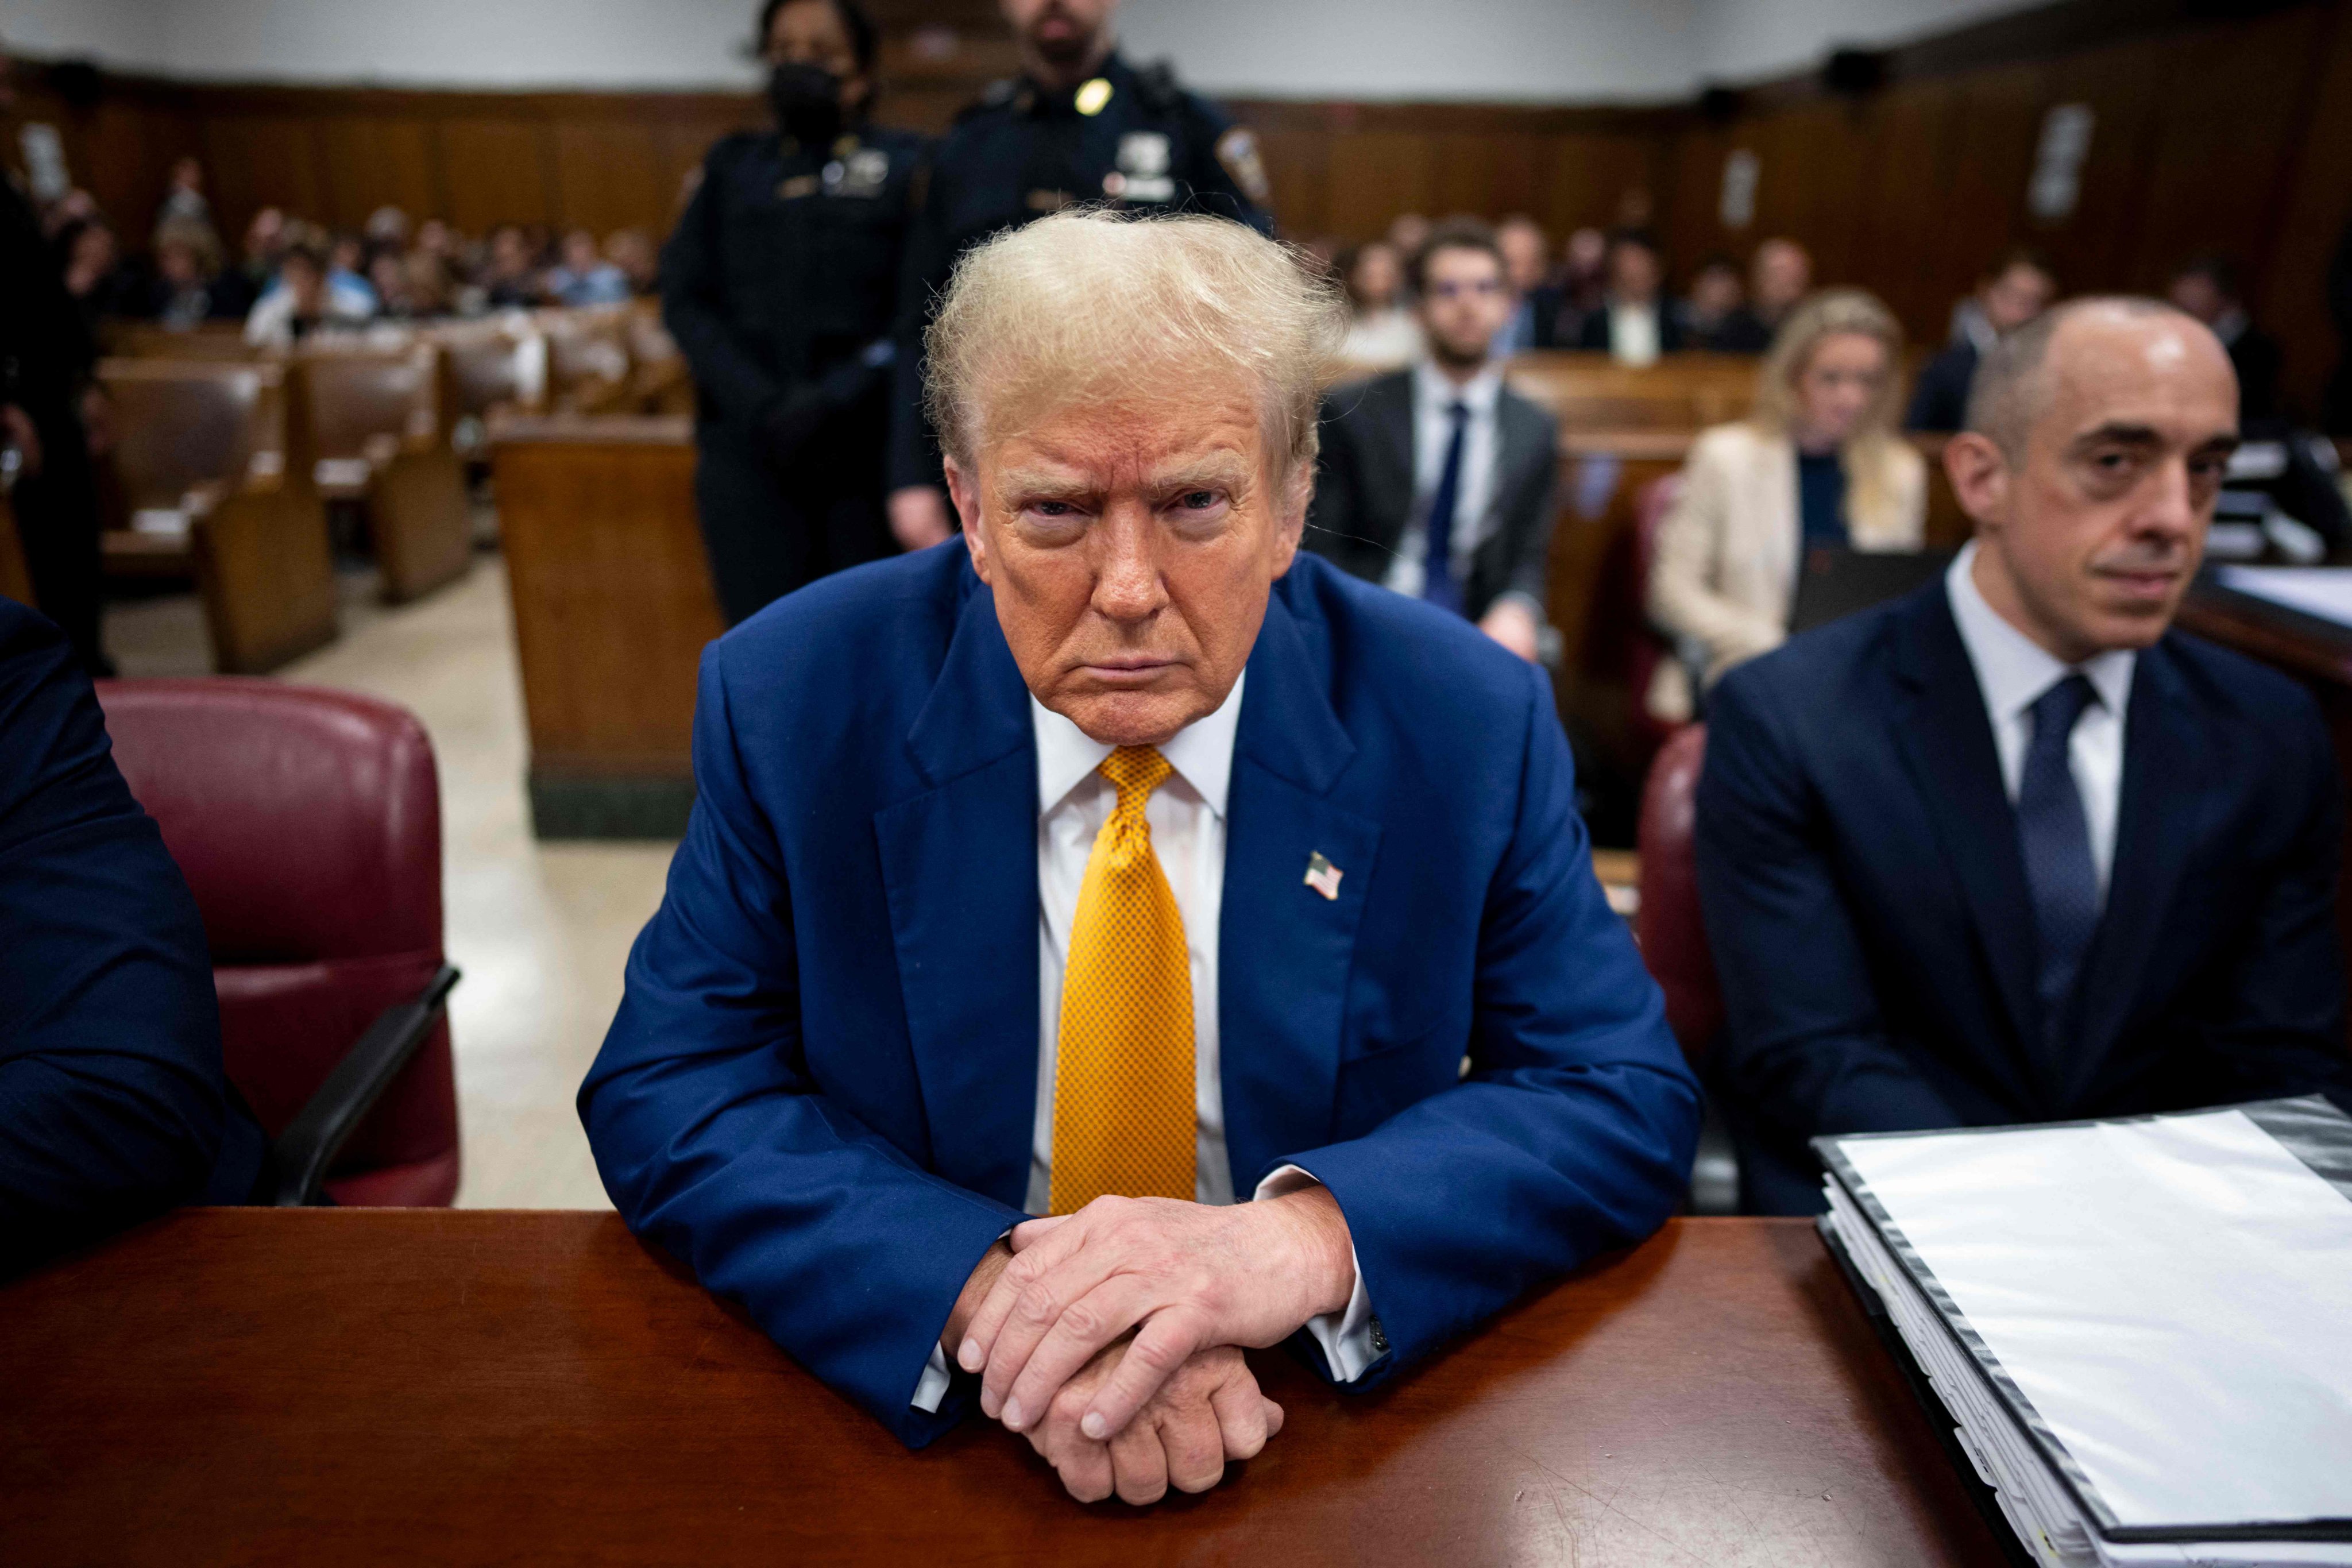 Former US president Donald Trump awaits the start of proceedings in his criminal trial in New York on Thursday. Photo: AFP